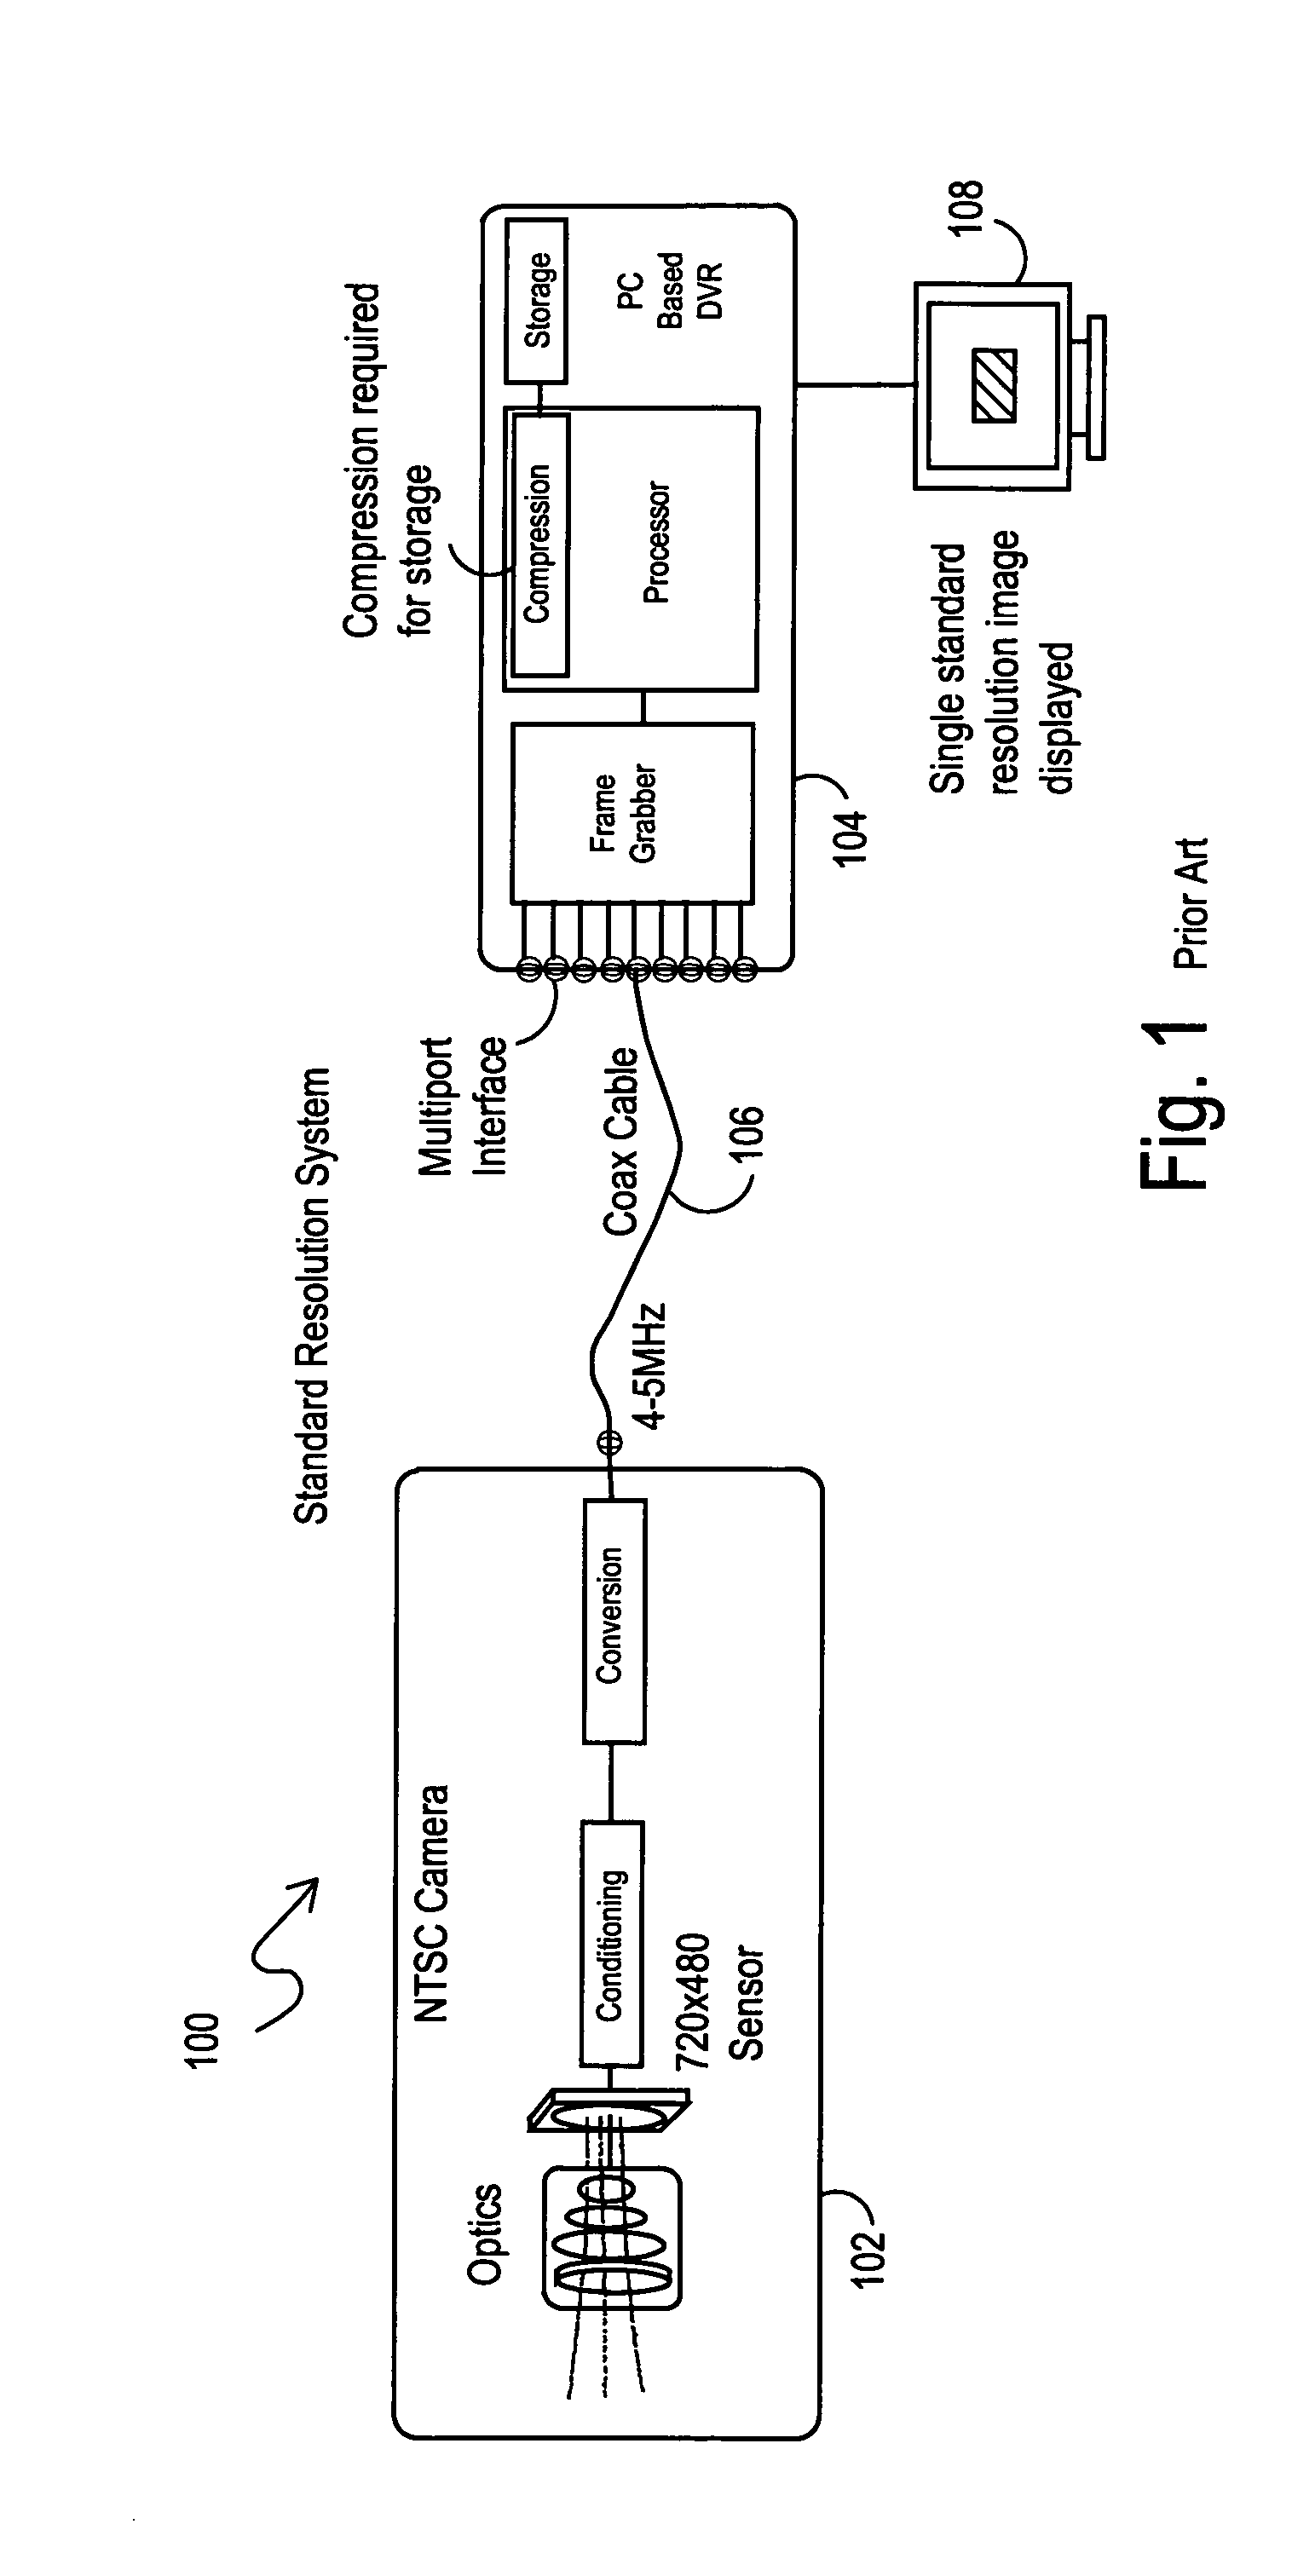 Systems and methods for multi-stream image processing